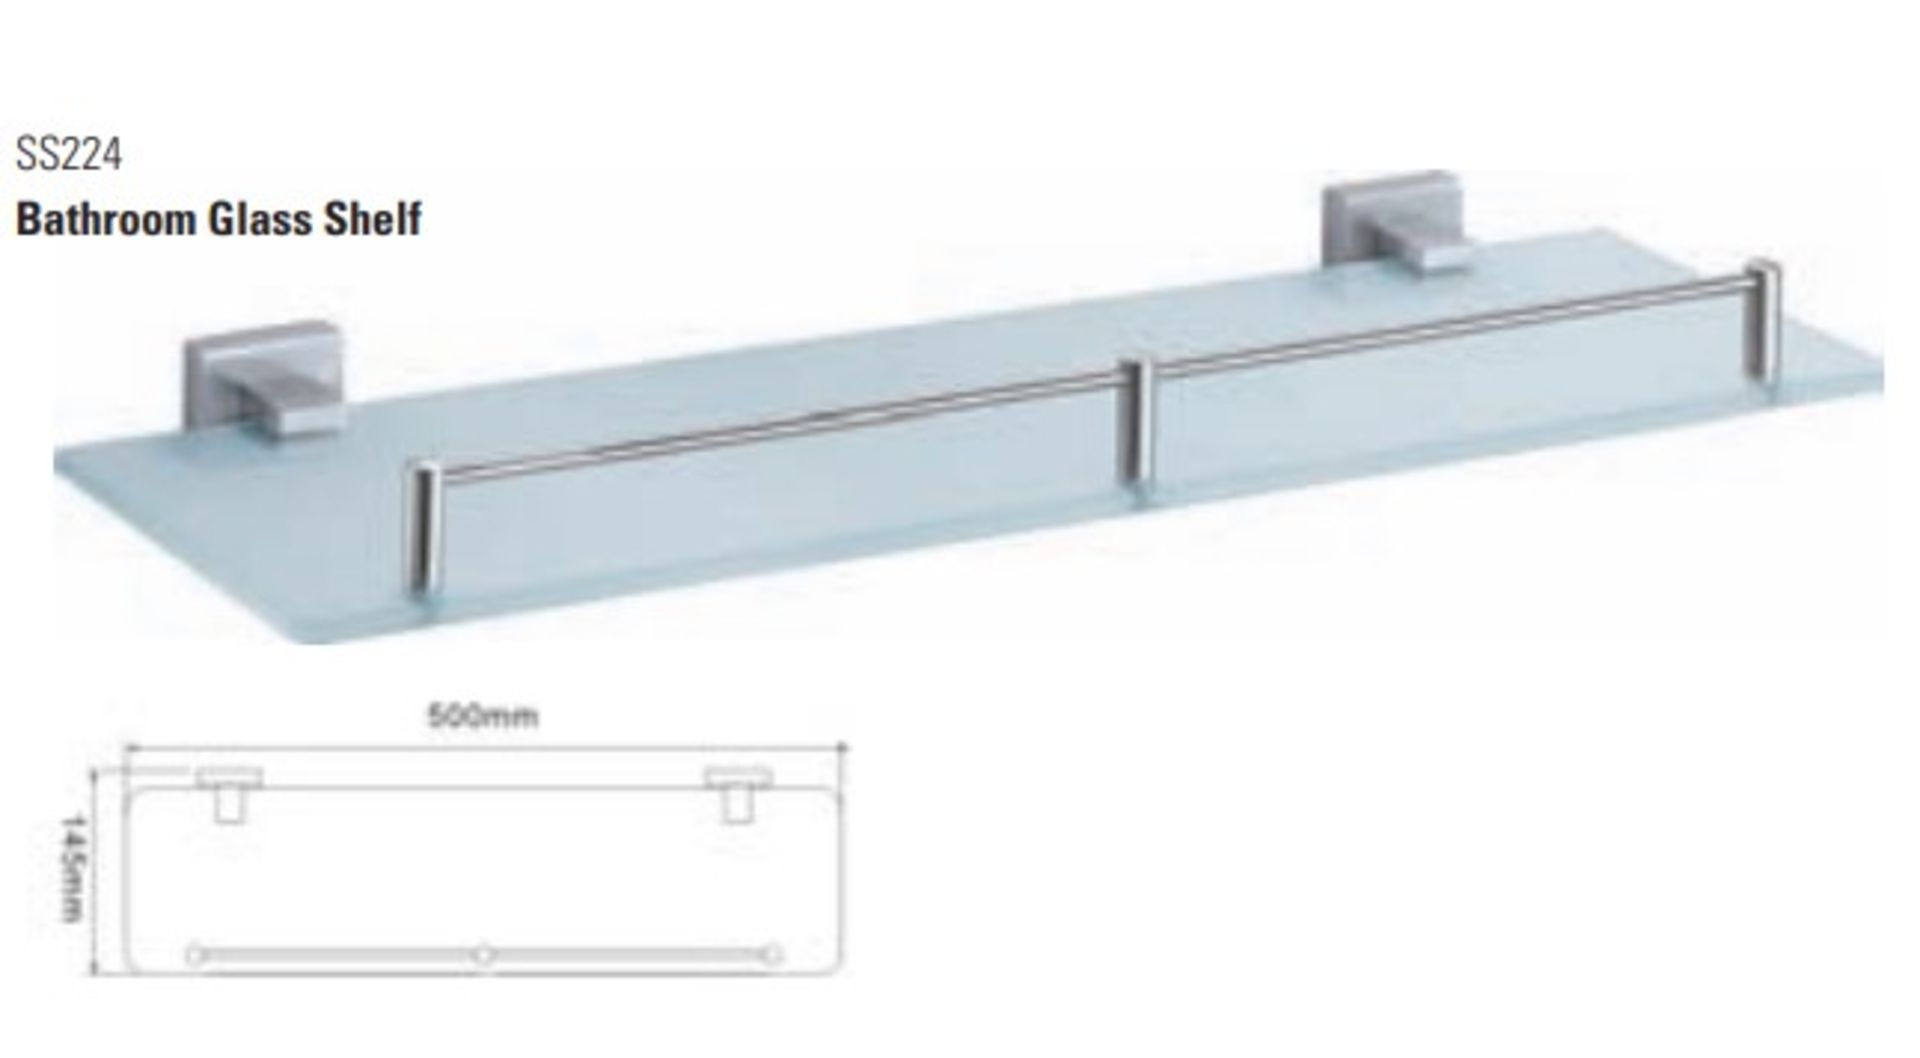 1 x Stonearth Glass Wall Mounted Shelf With Gallery Rail - Solid Stainless Steel Bathroom - Image 2 of 3